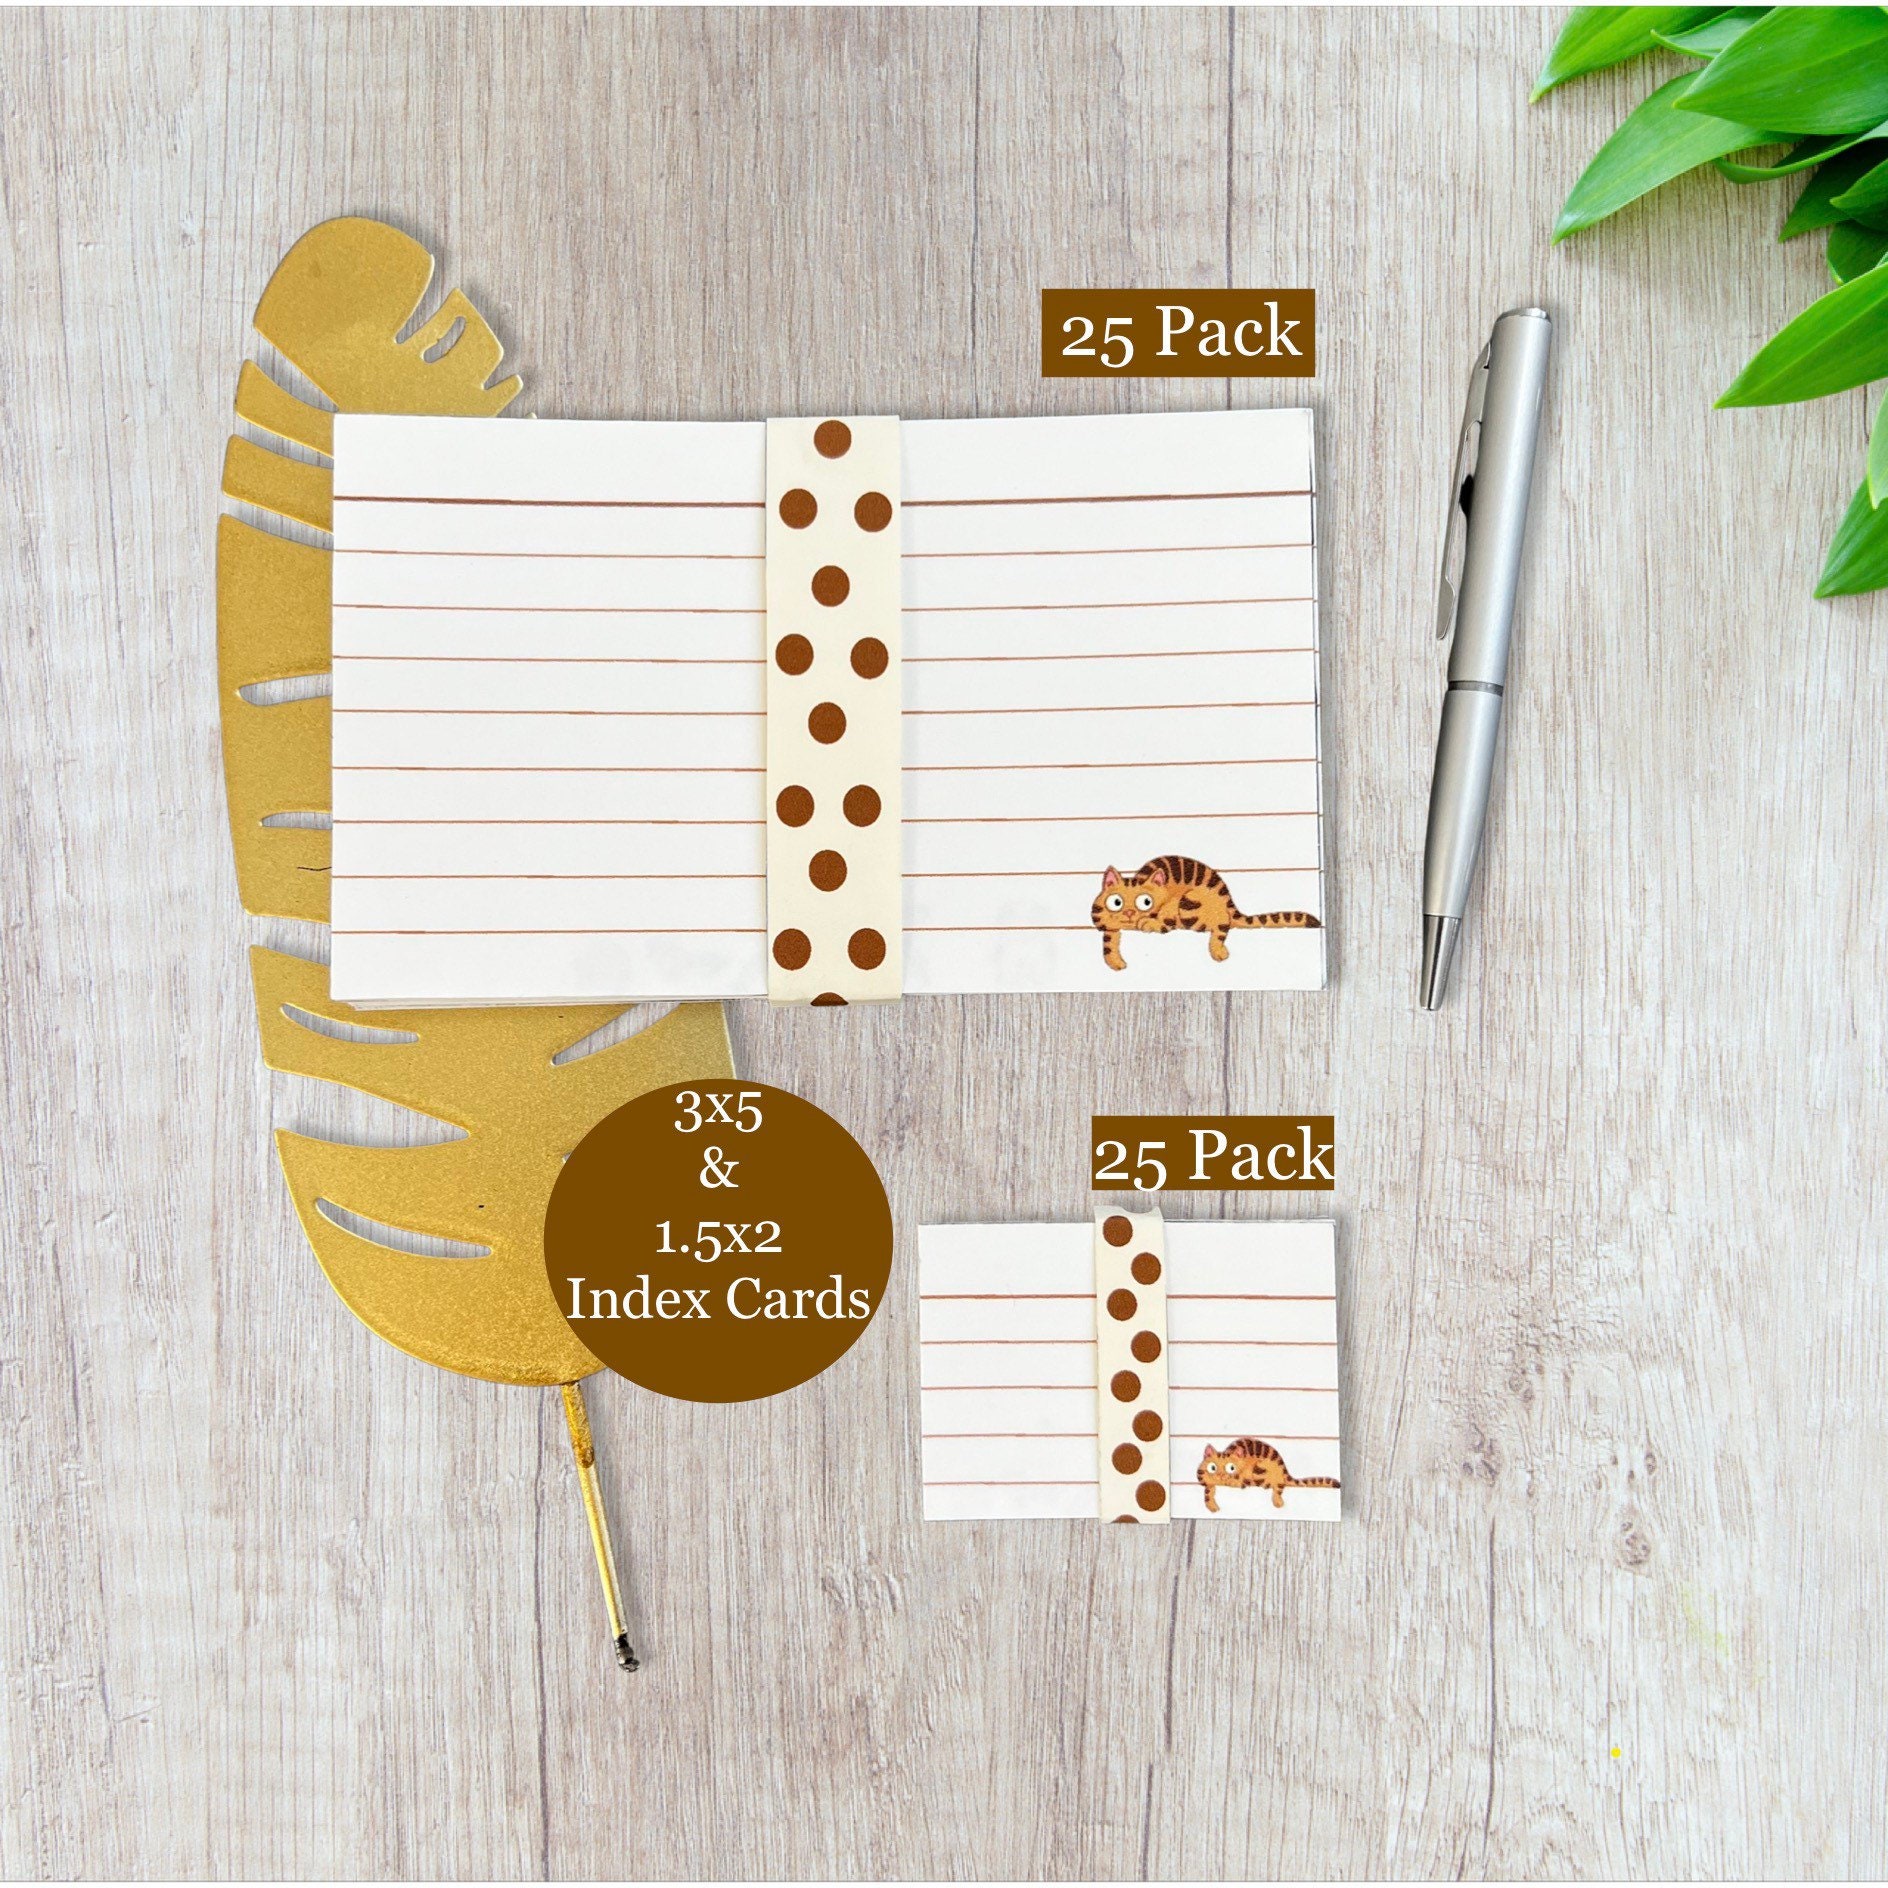 3x5 Index Cards Ruled Index Cards pack of 25 Kawaii Bear Index Cards Brown  Lined Index Cards index Cards for Kids Study Note Card 